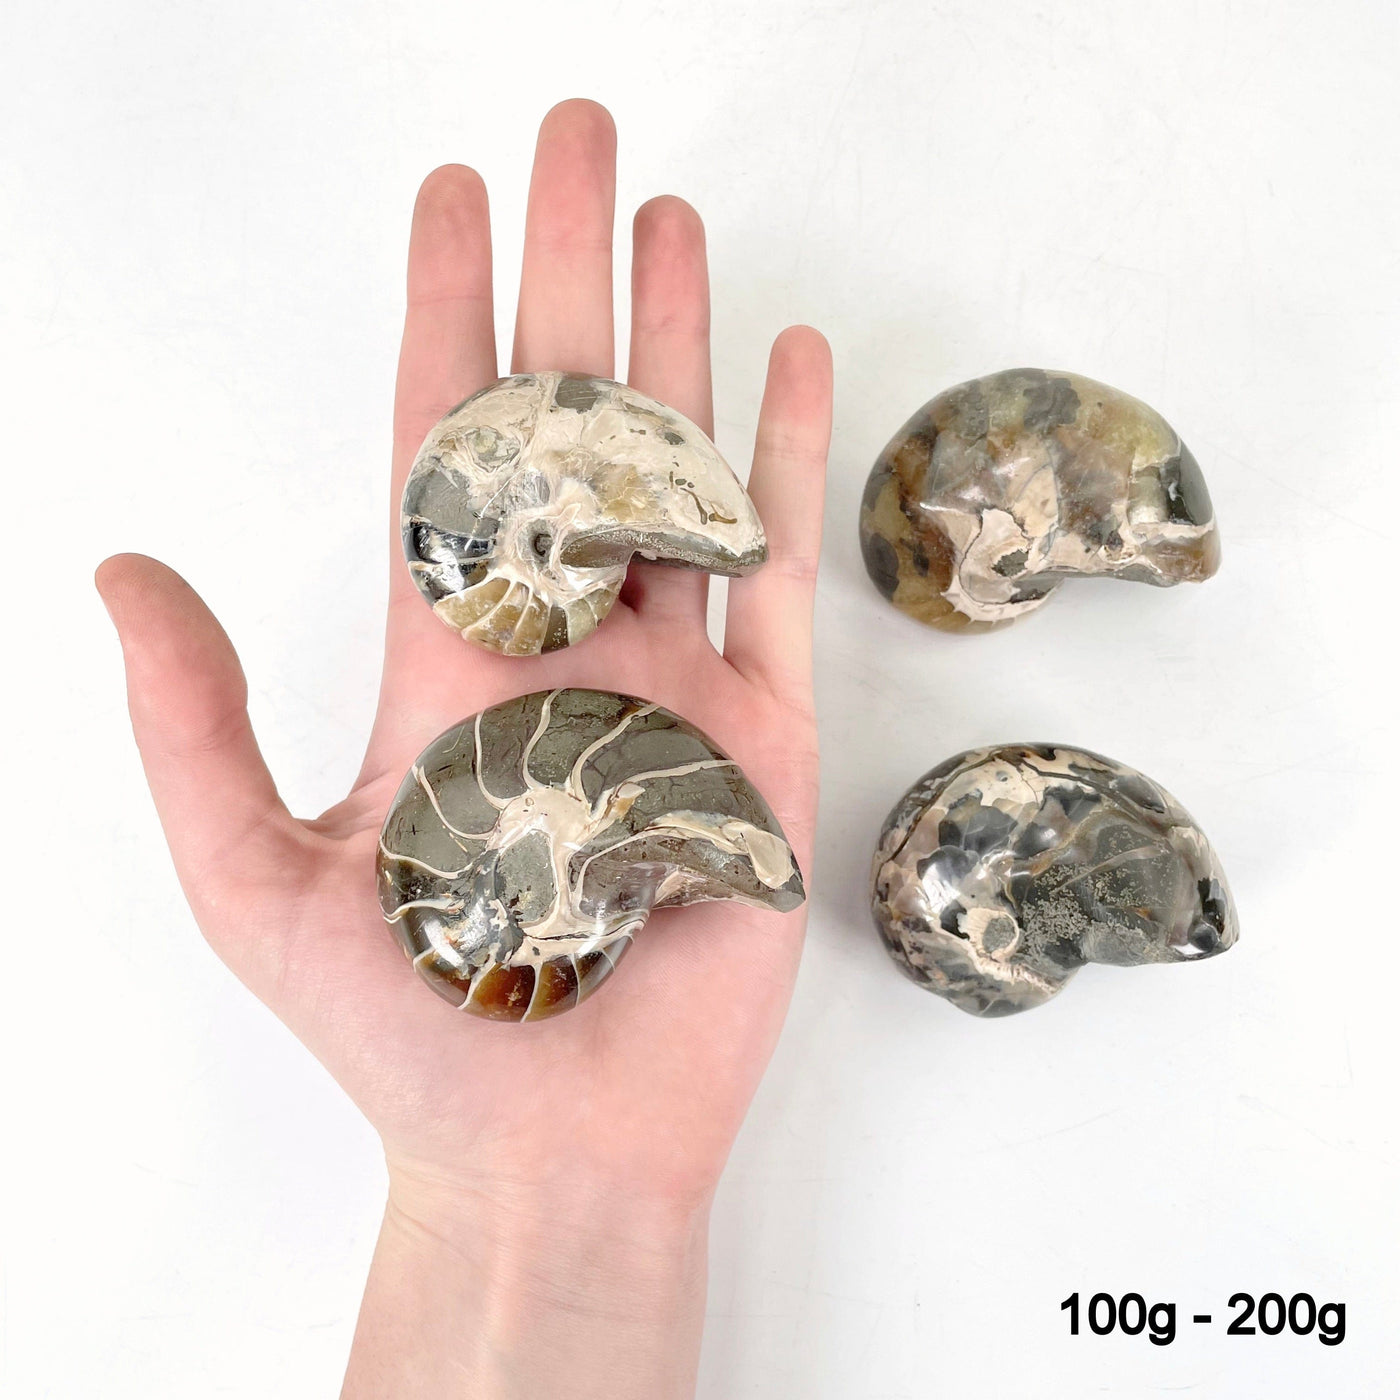 100g - 200g nautilus fossils in hand and laying flat for size reference 